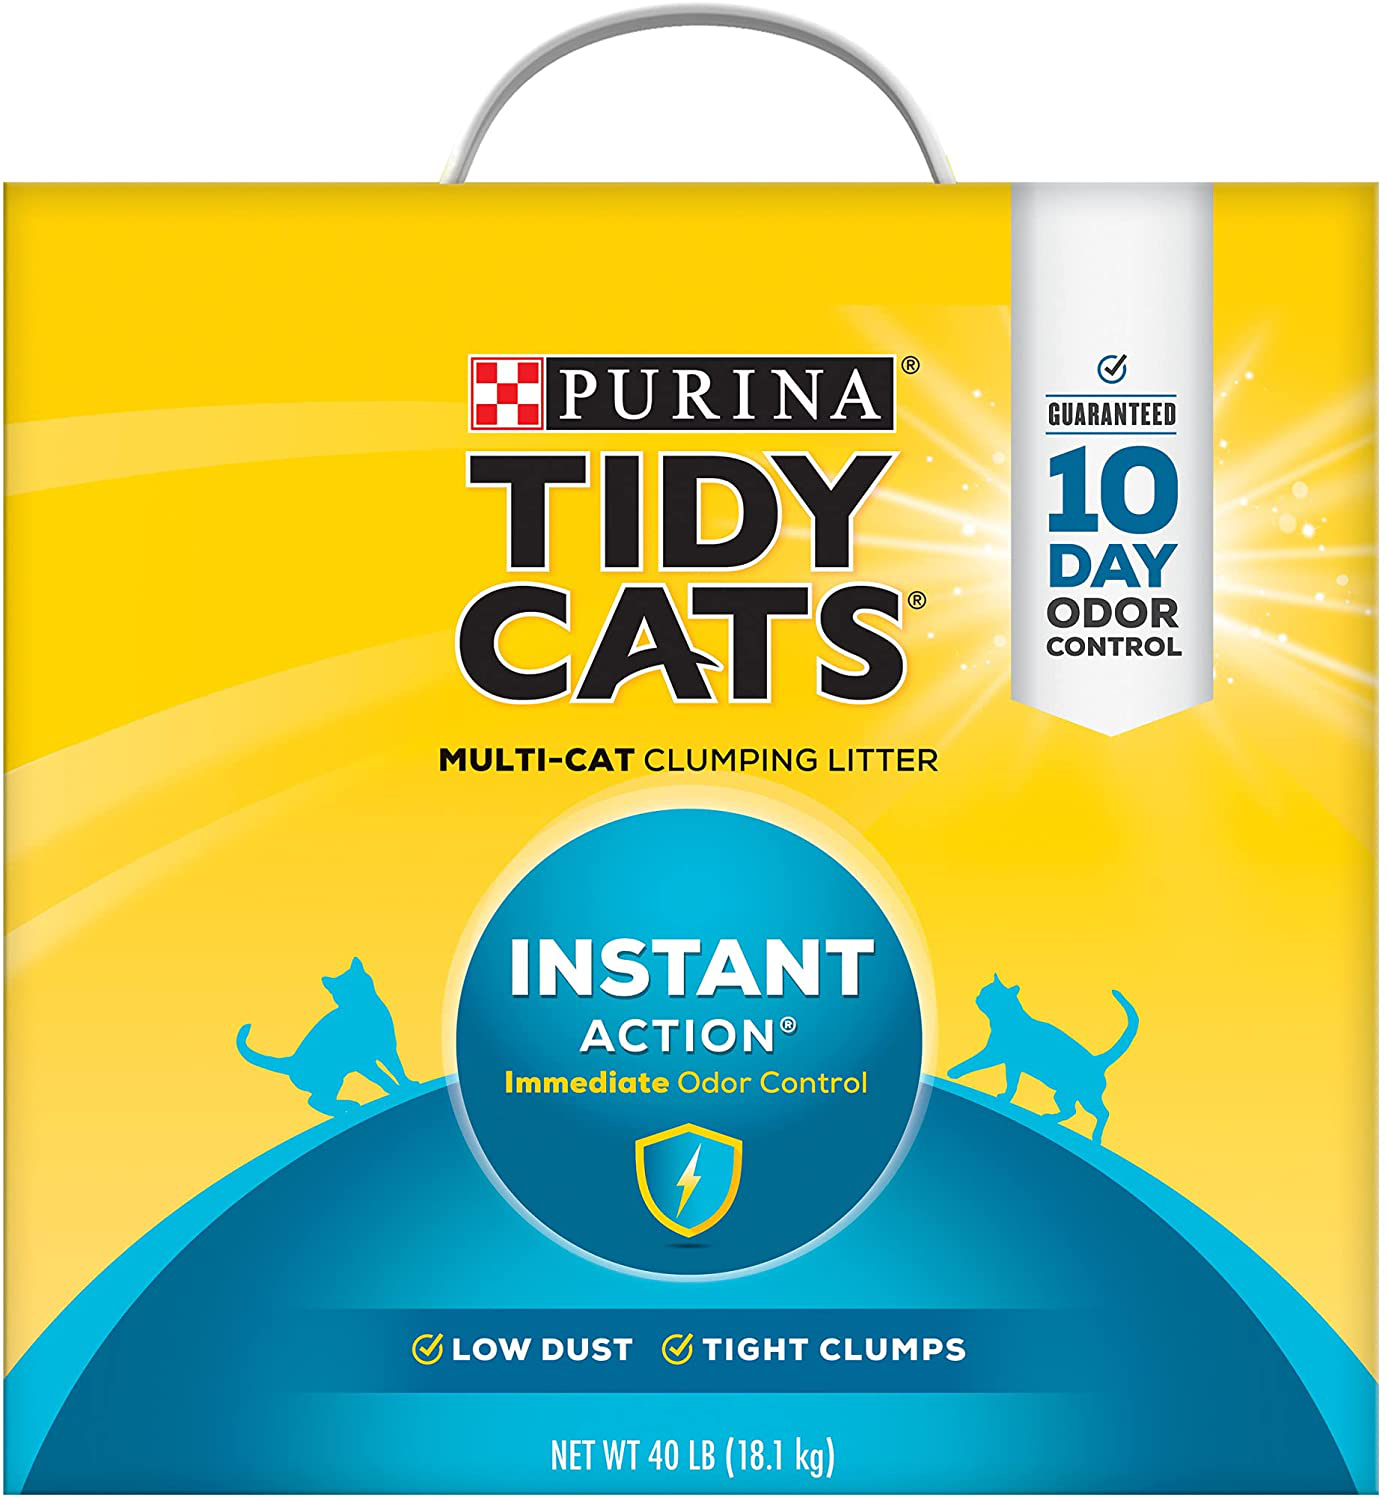 Purina Tidy Cats Instant Action Clumping Cat Litter - 40 Lb. Box (00070230107121)